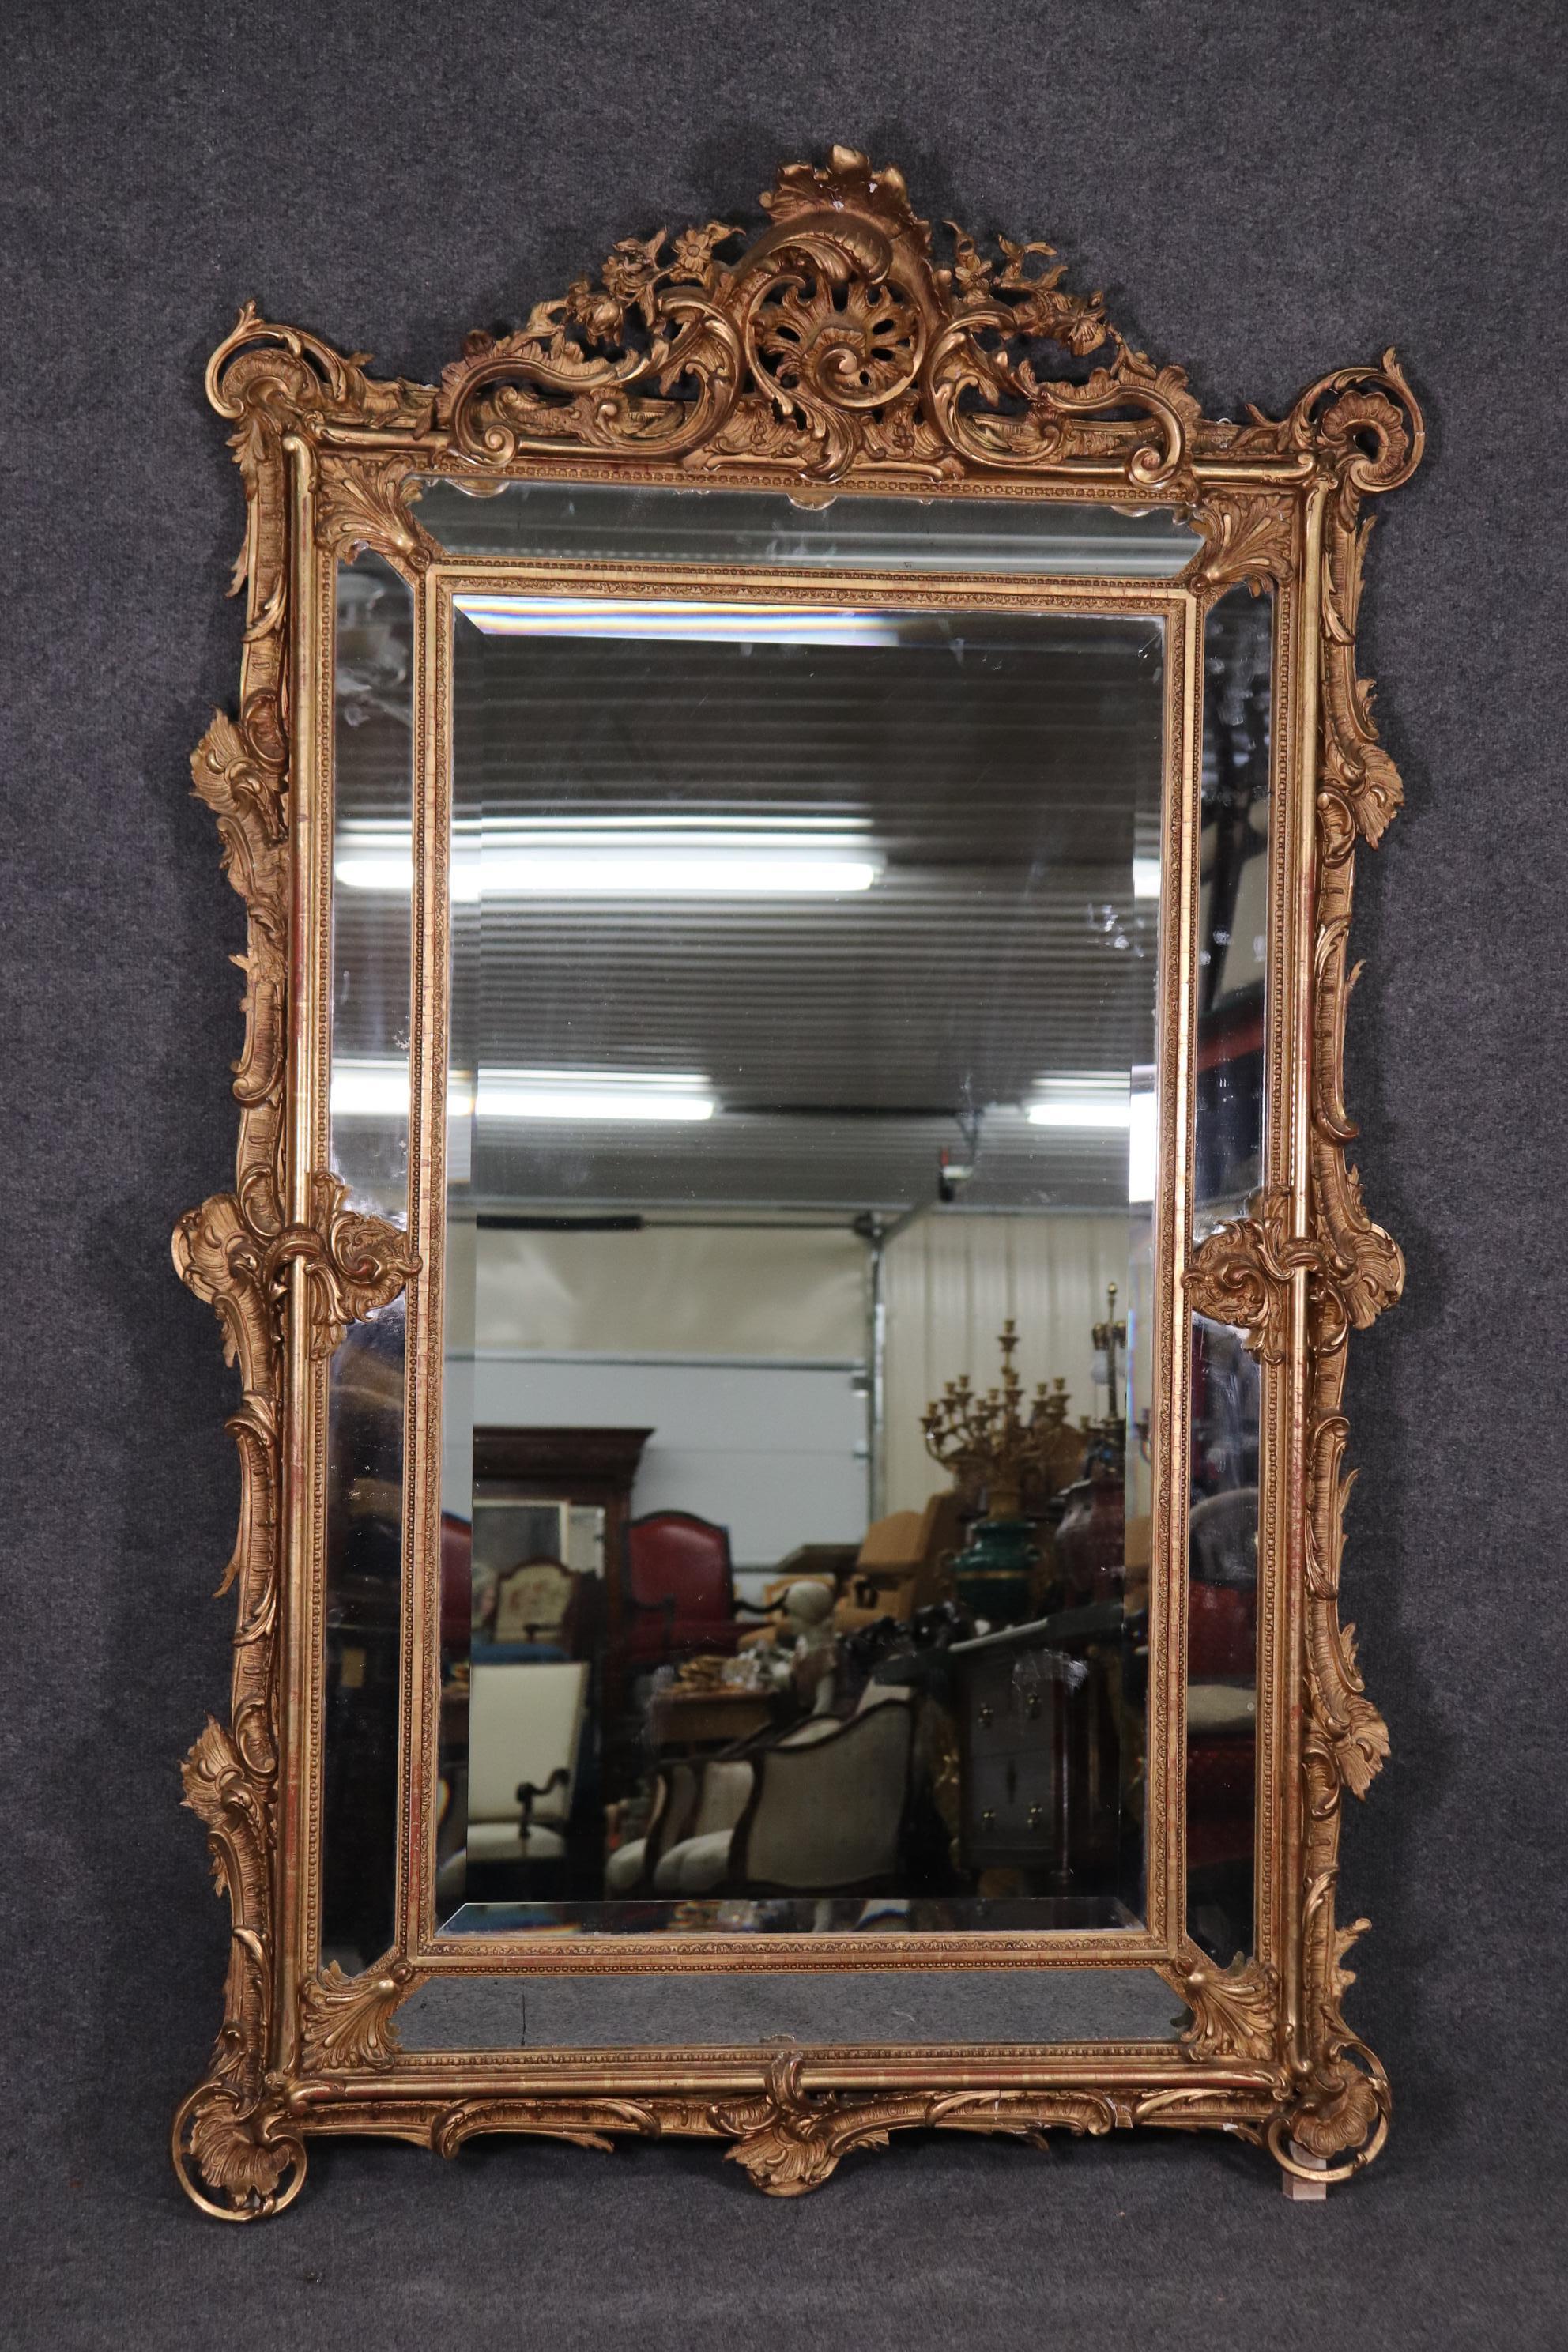 This is a gorgeous mirror with incredibly intricate carving and a beautiful gilded gold finish. The mirror dates to the 1920s and is 52 tall x 31 wide x 2 inches deep.